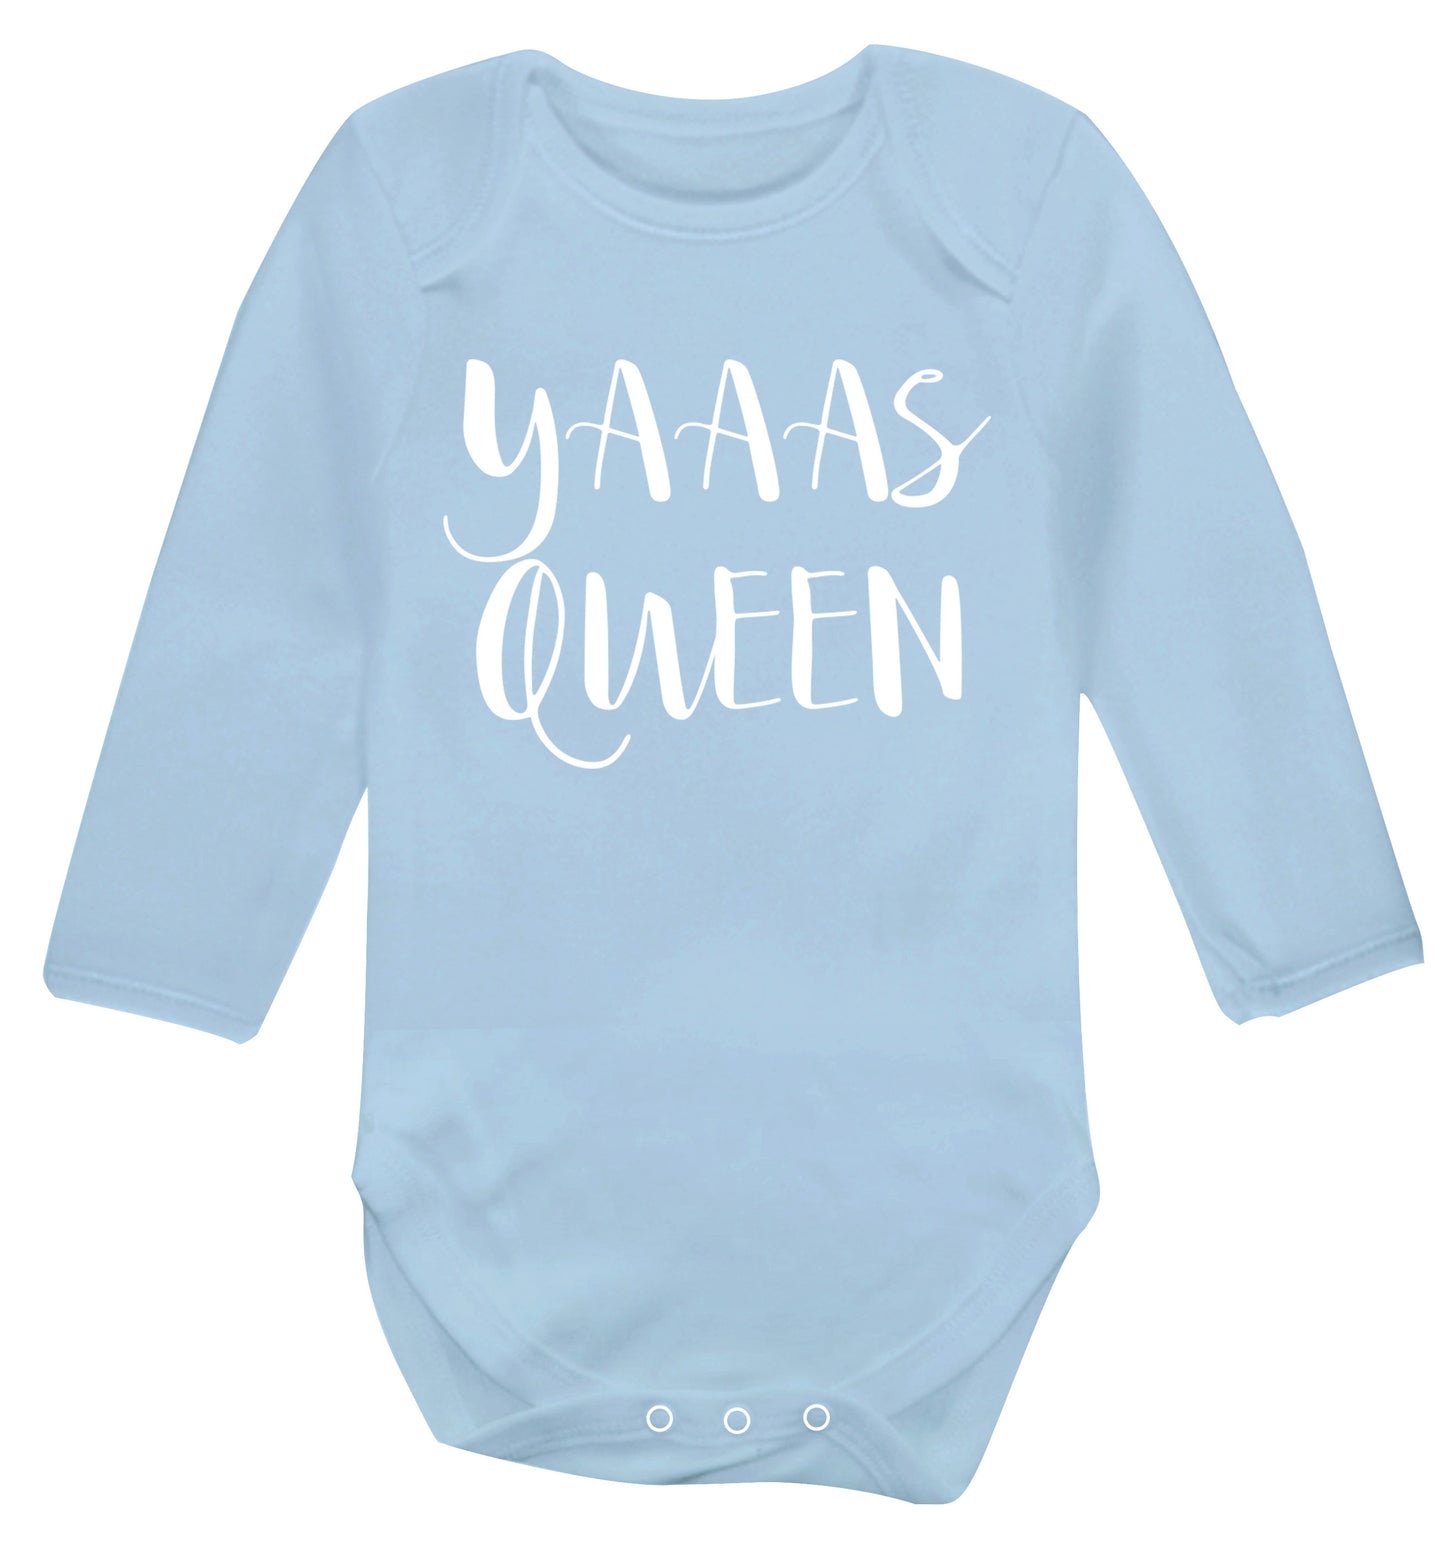 Yas Queen Baby Vest long sleeved pale blue 6-12 months